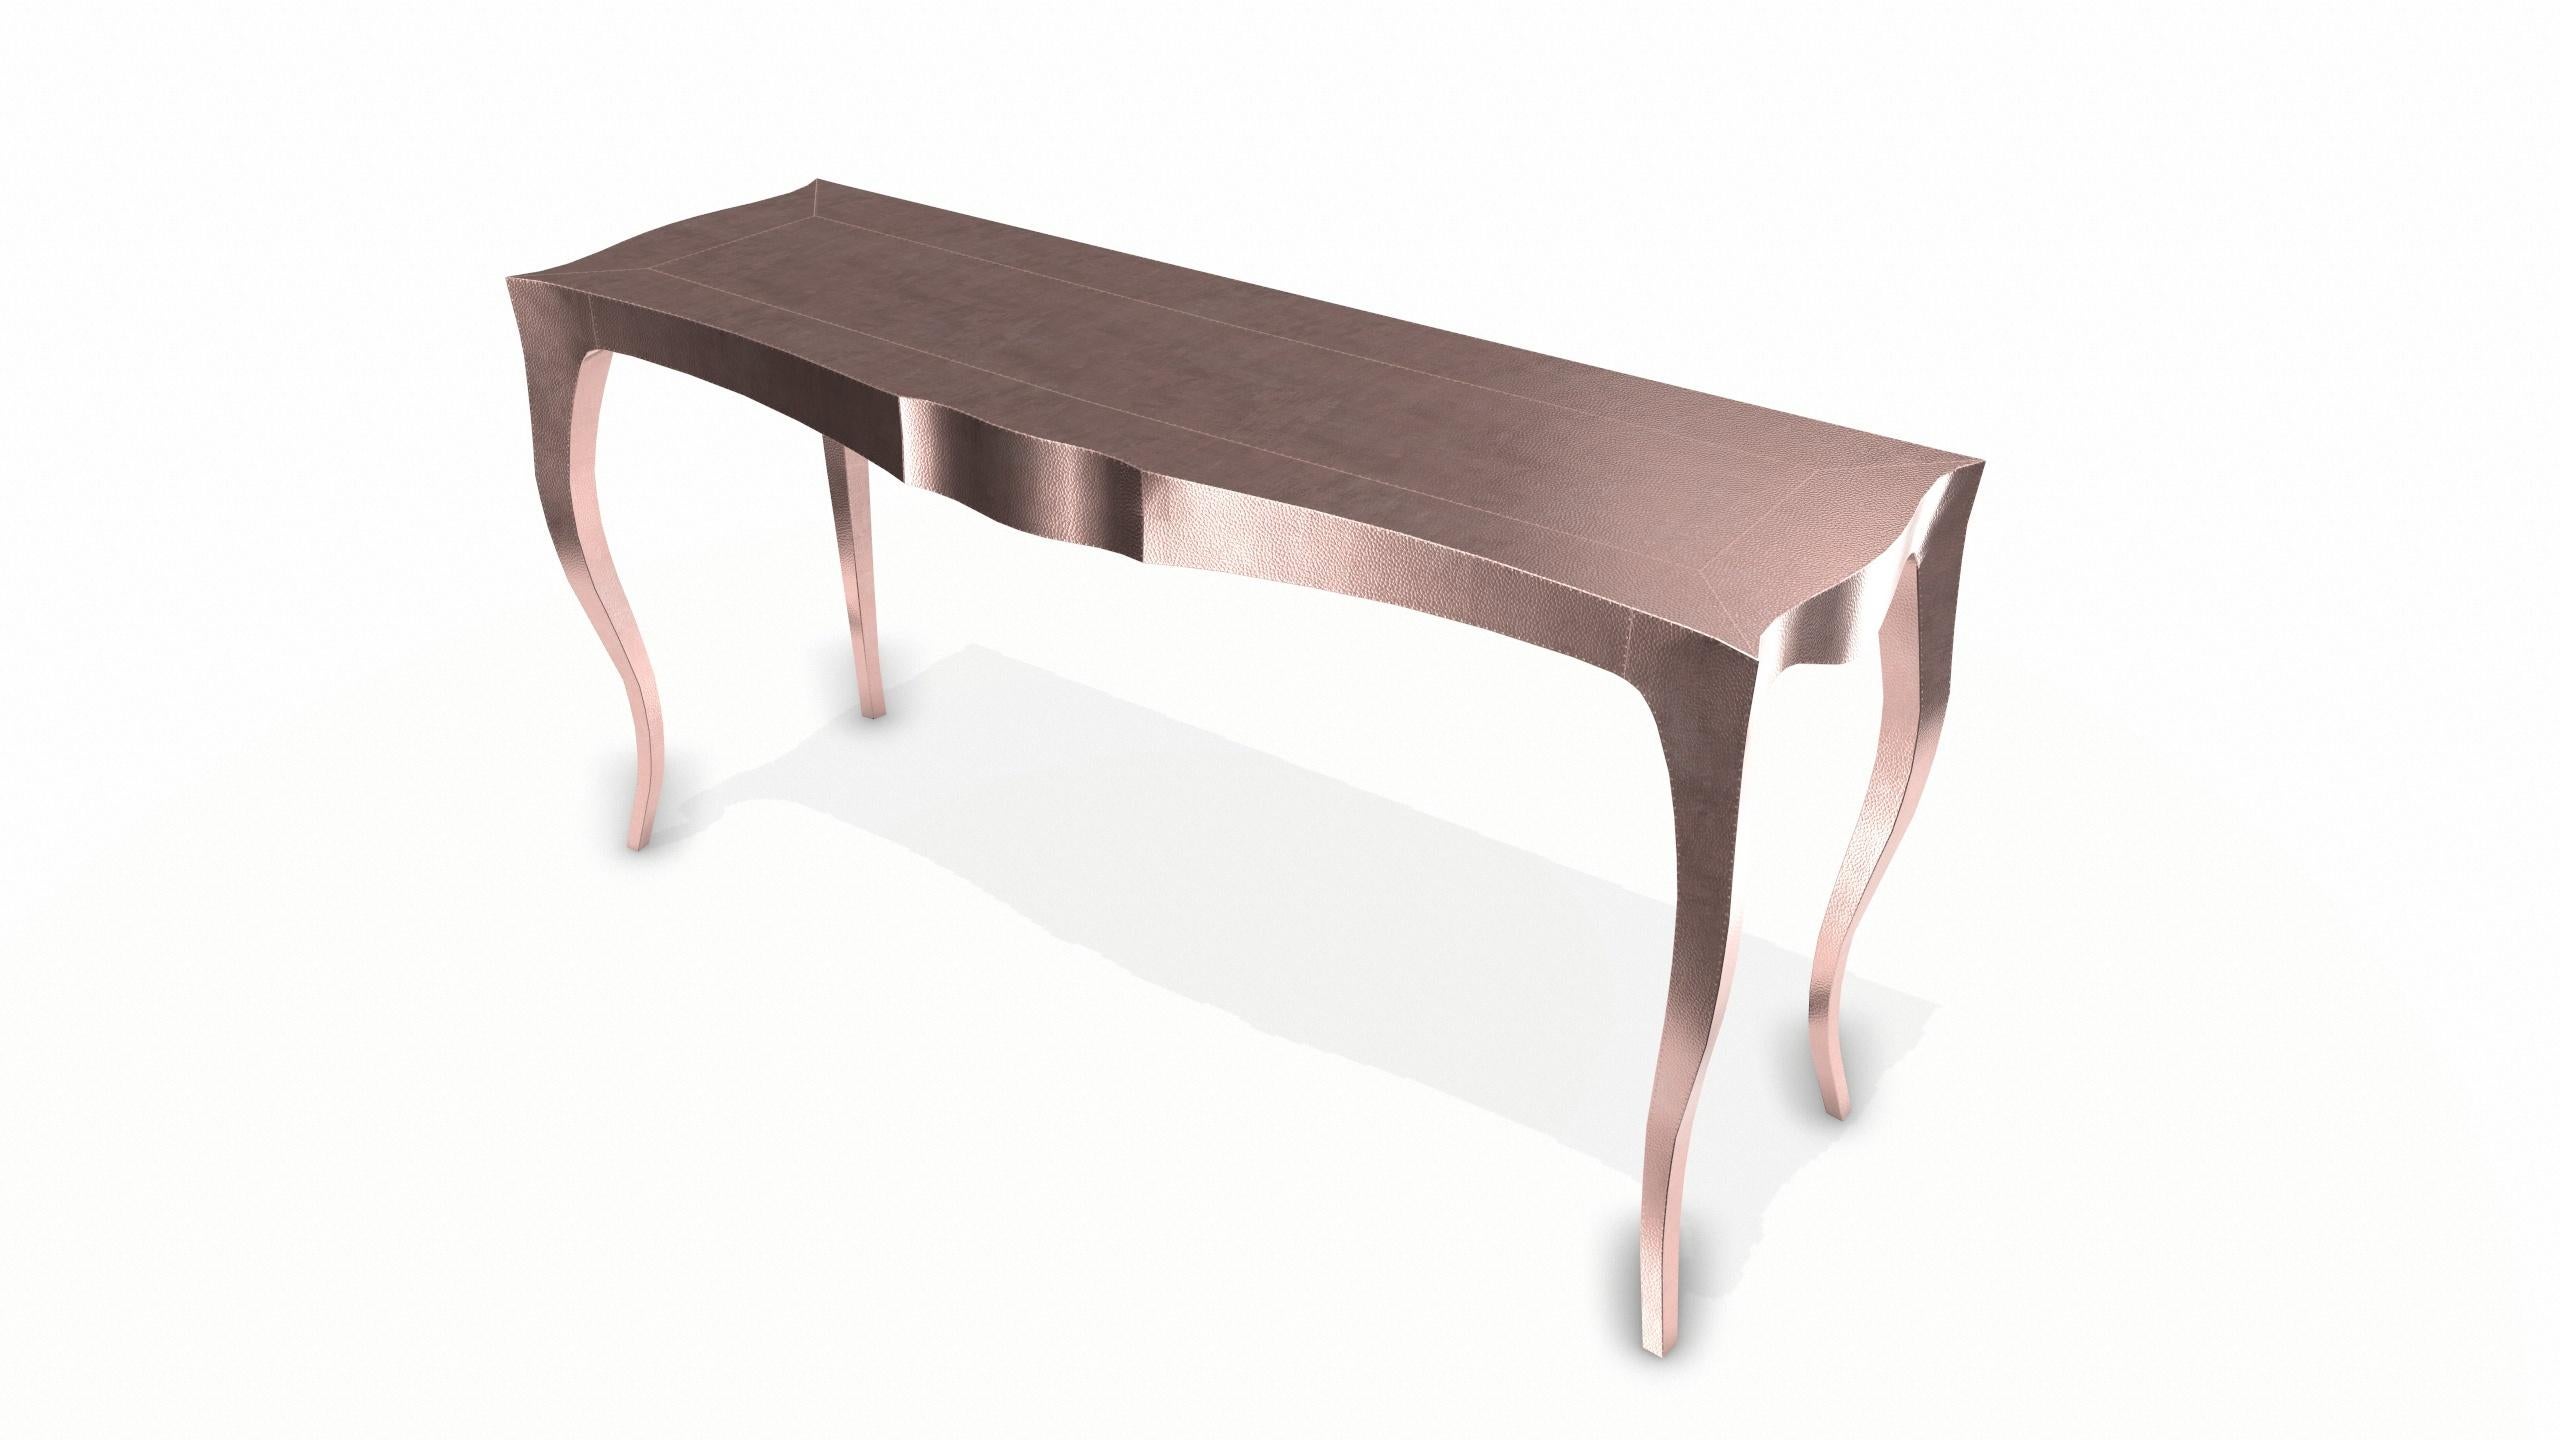 Other Louise Console Art Deco Card and Tea Tables Mid. Hammered Copper by Paul Mathieu For Sale